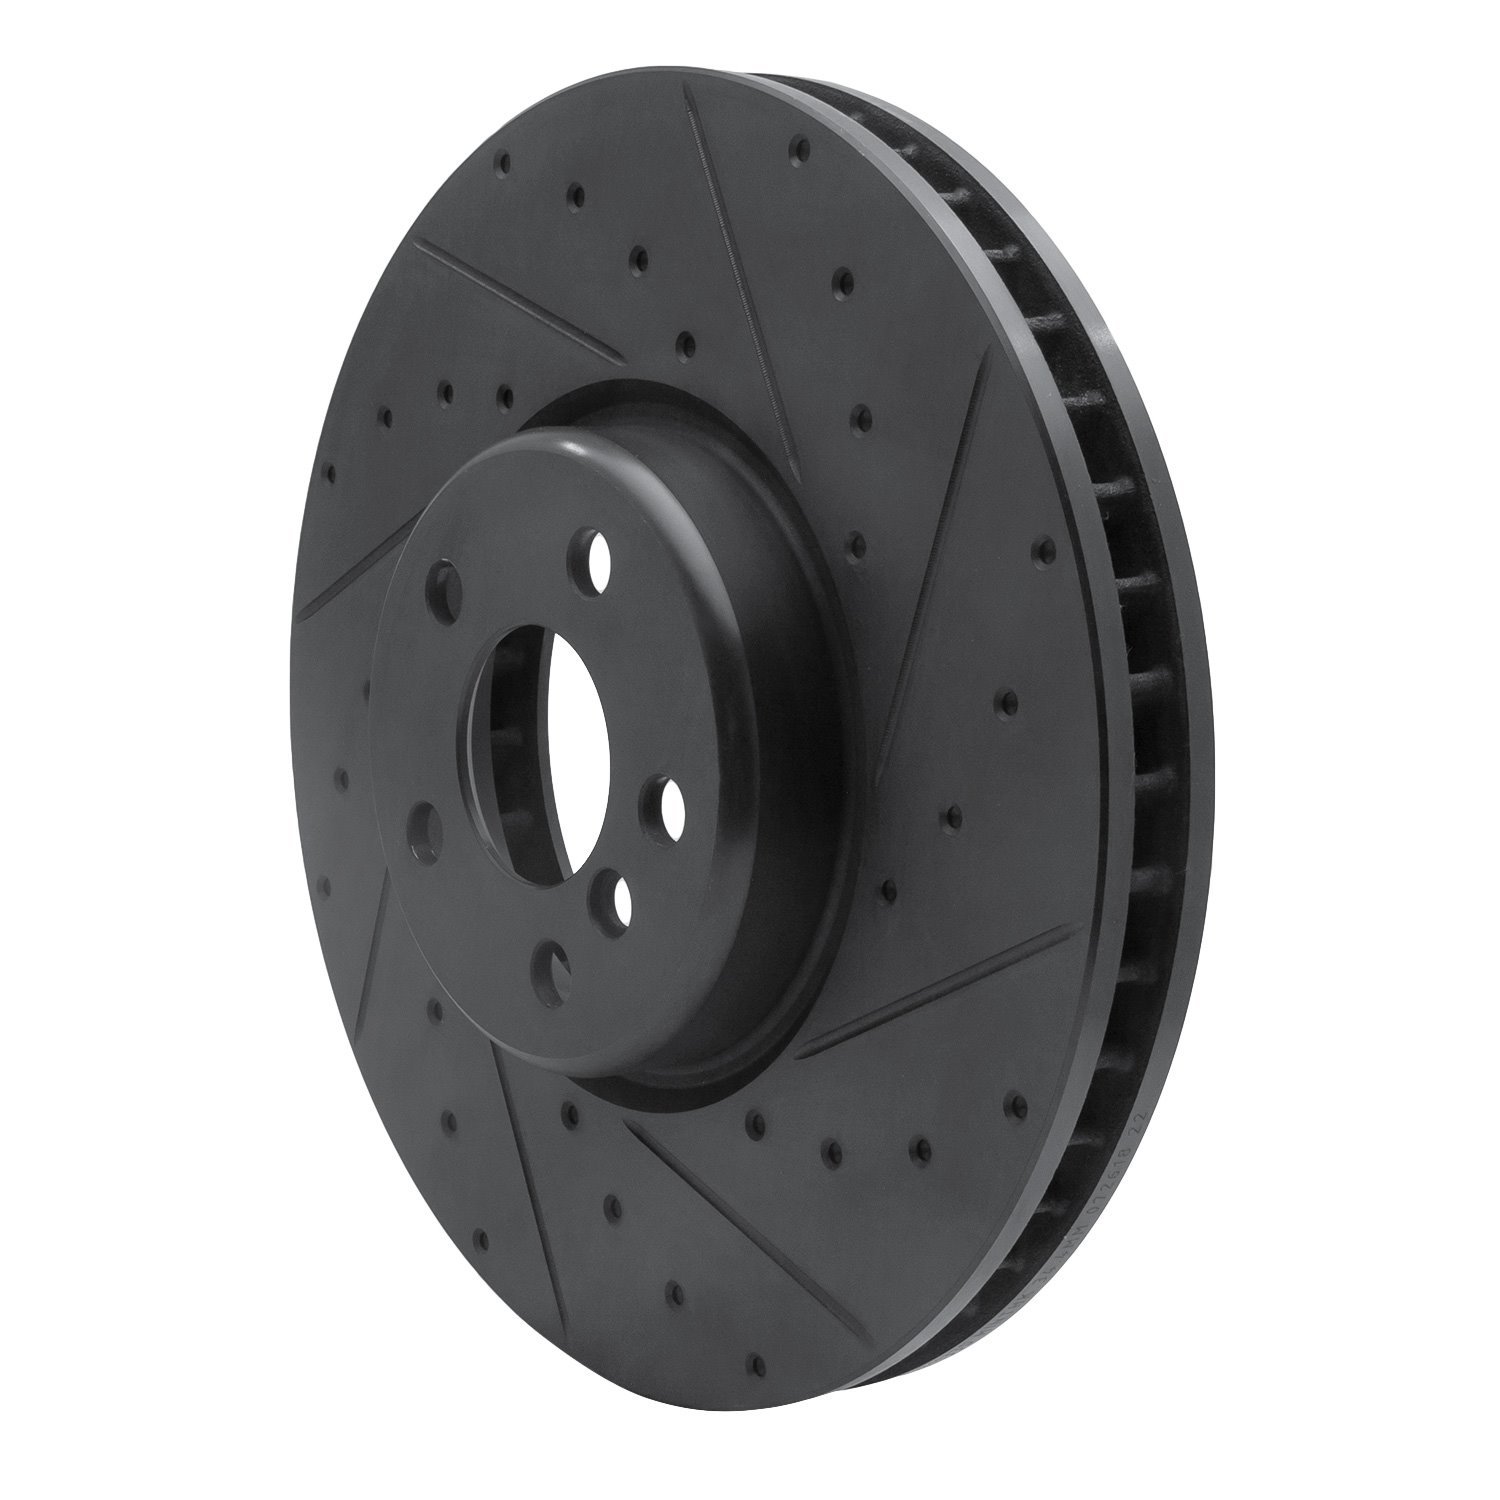 633-31133D Drilled/Slotted Brake Rotor [Black], Fits Select Multiple Makes/Models, Position: Right Front